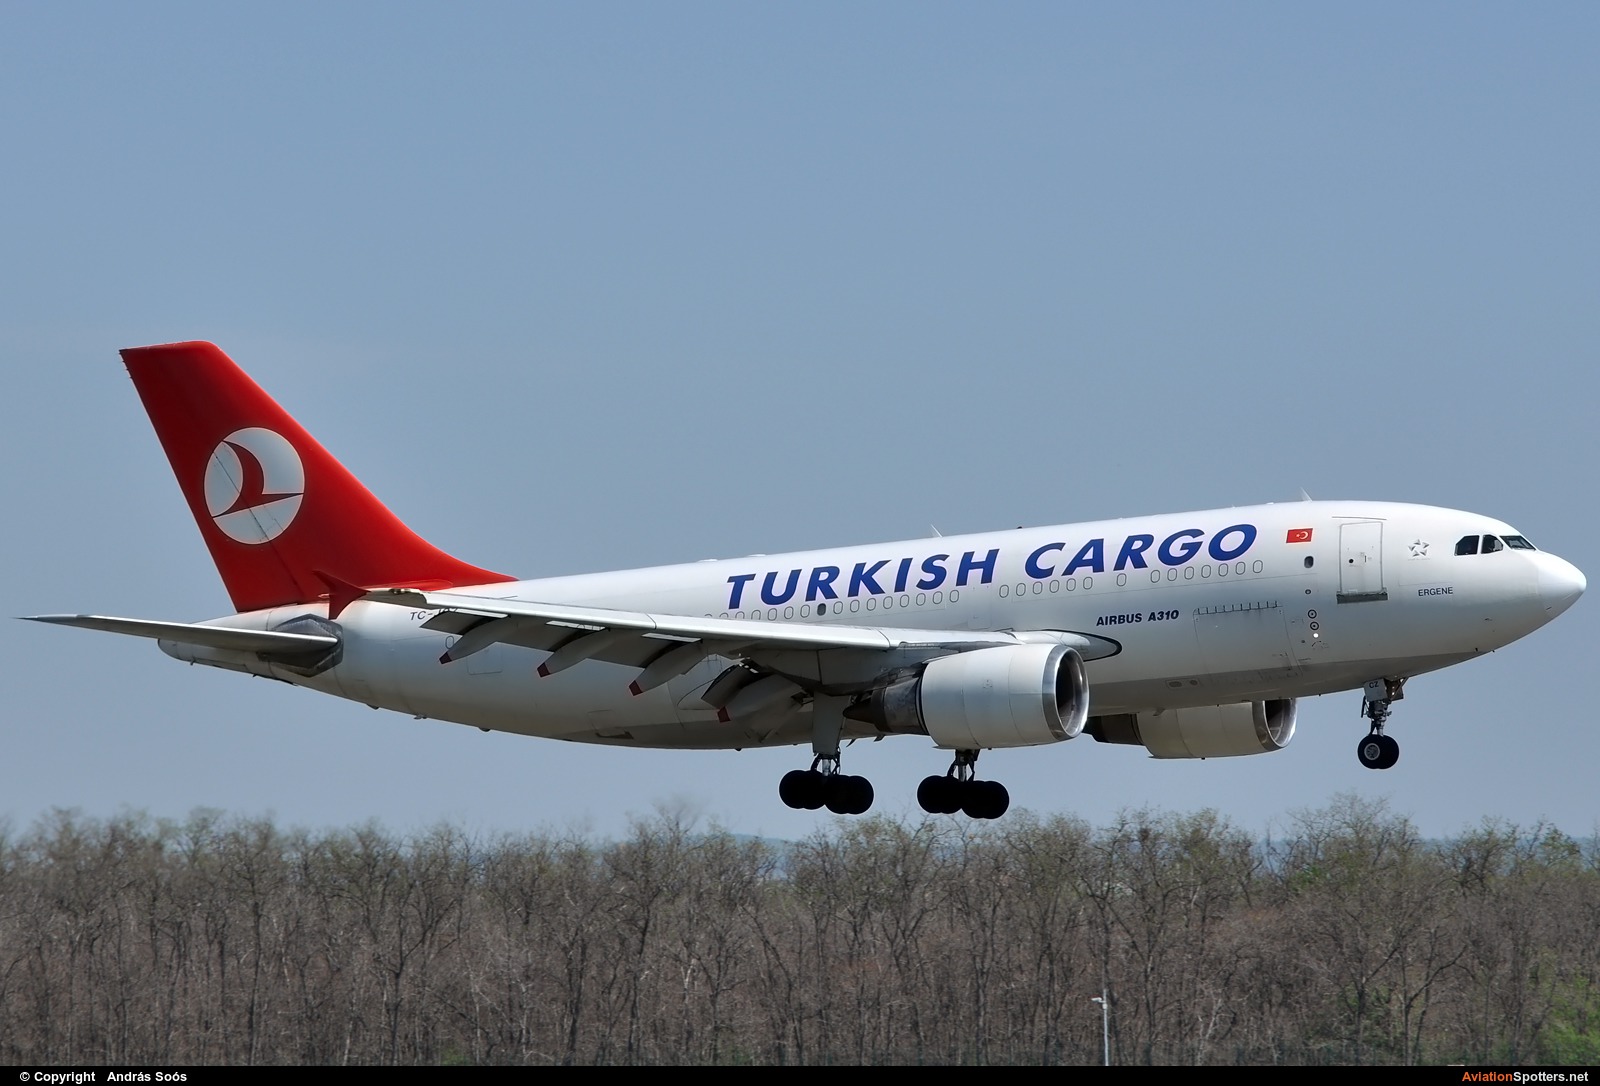 Turkish Airlines Cargo  -  A310F  (TC-JCZ) By András Soós (sas1965)